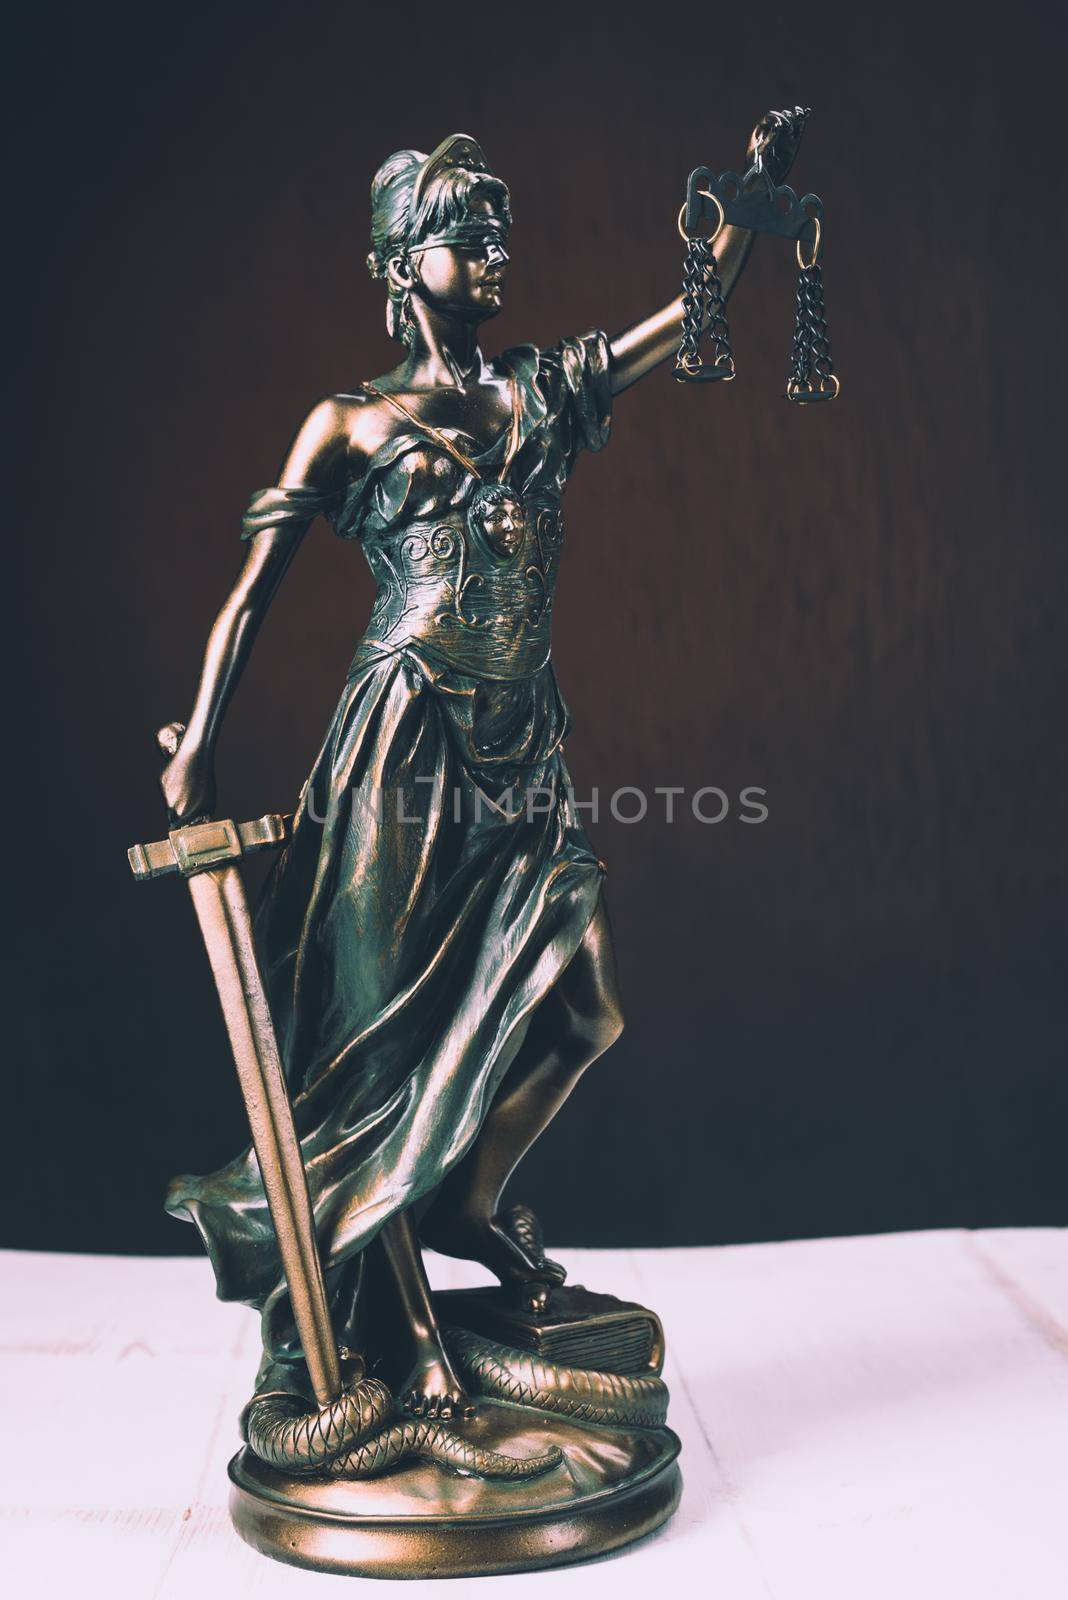 Themis Statue Justice Scales Law Lawyer Business Concept. - Image